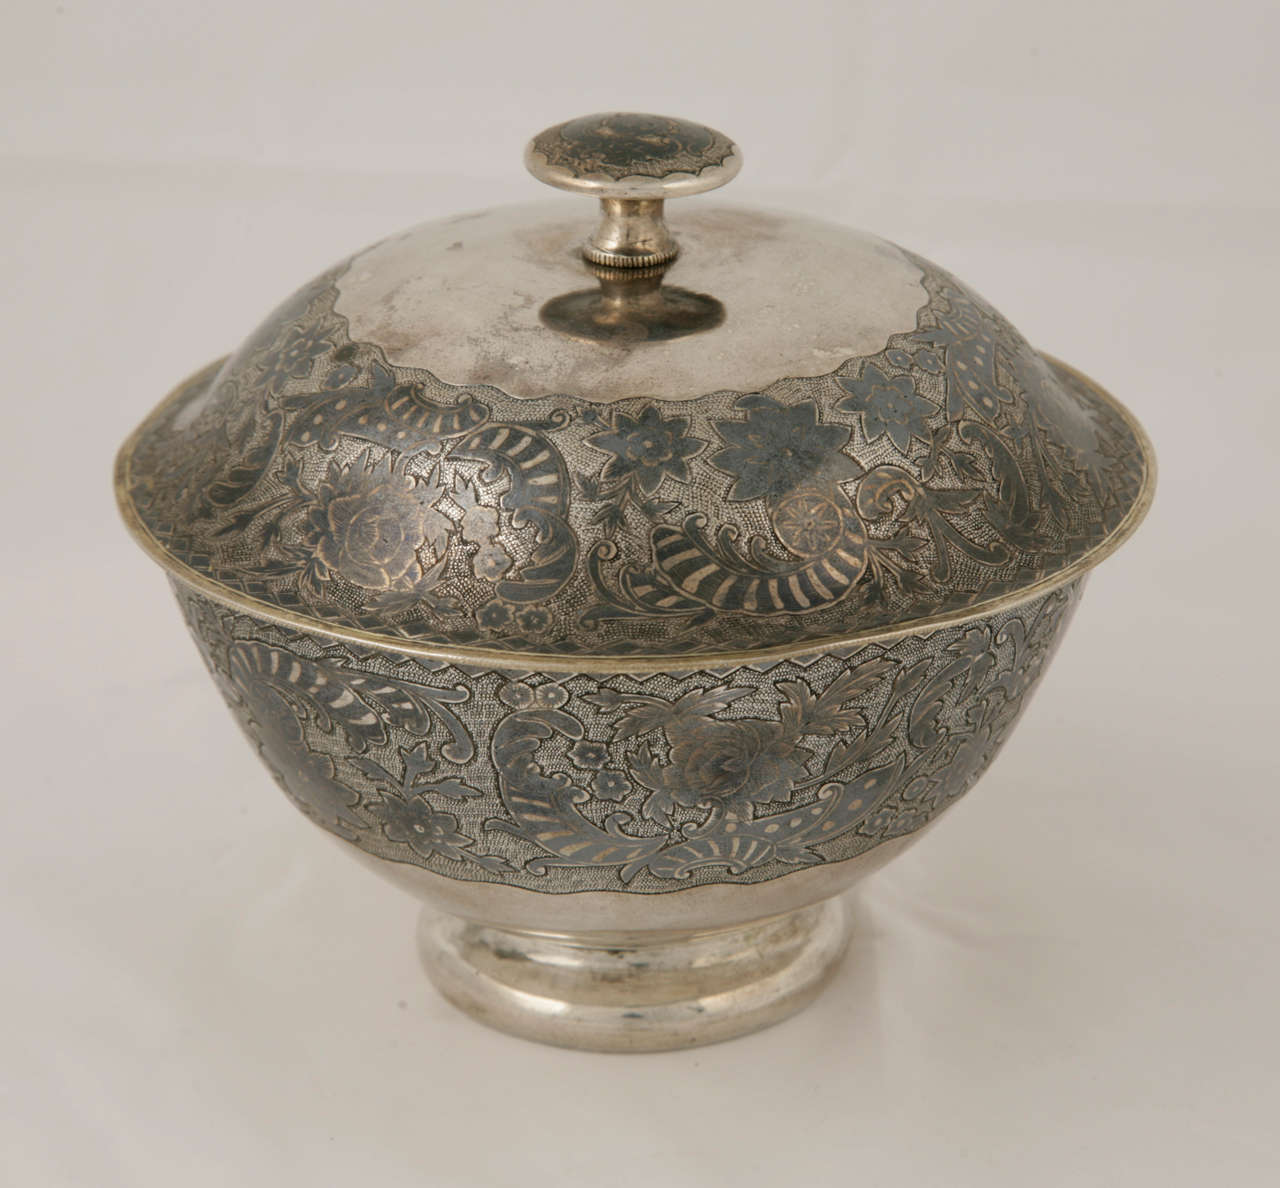 A pair of Caucasian silver and niello covered bowls with gilded interior, and part gilding to the outside. They are of exceptionally fine detail and quality and are circa 1850.
Measures: The weight of the pair is 947gms.
The height is 12cms.